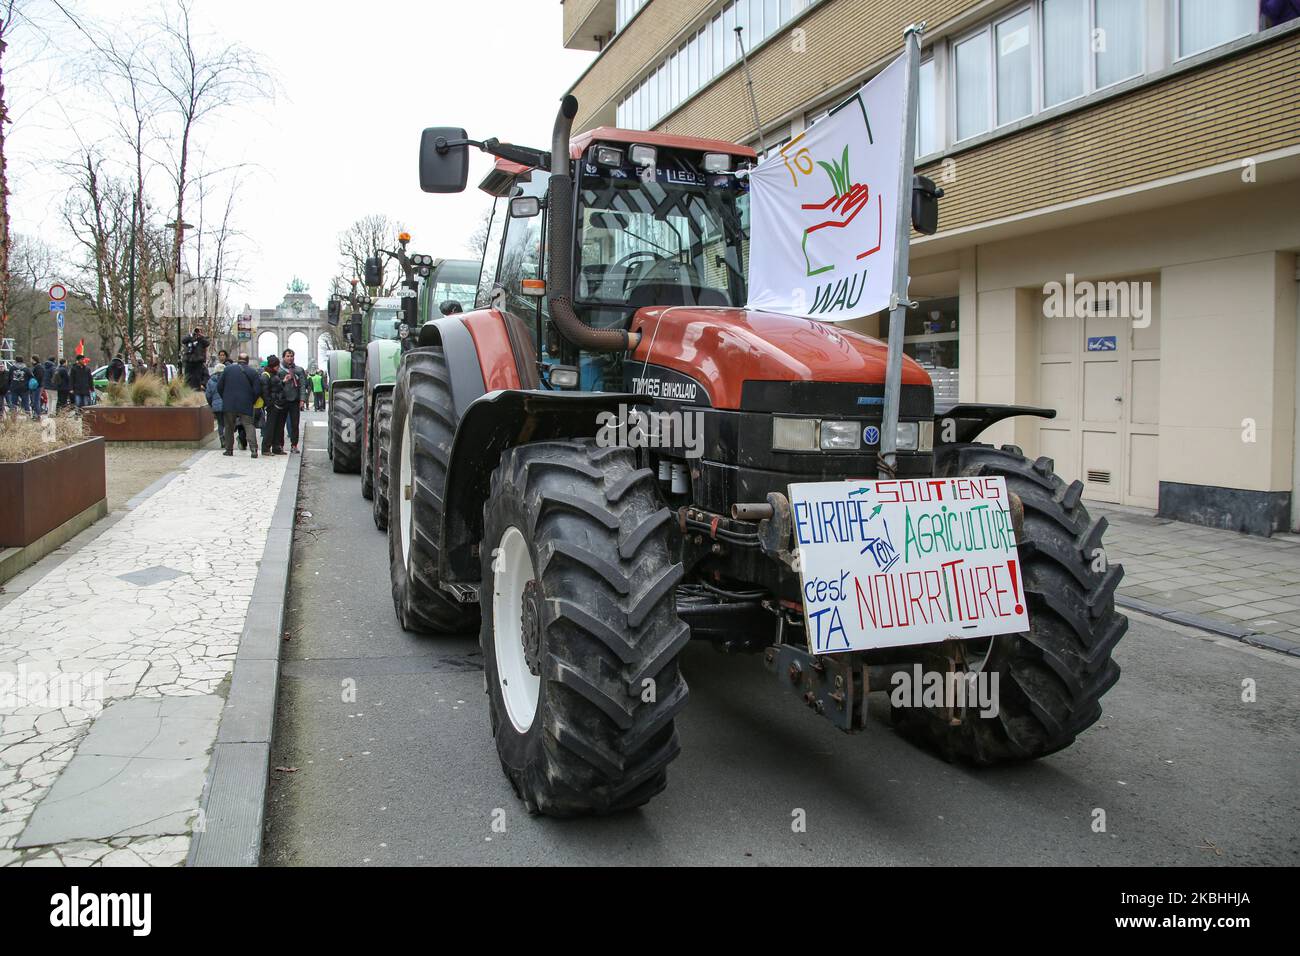 Farmers and European milk producers gather during a rally with the support of 150 tractors, they protest in front of the EU Headquarters around Schumanplein ahead and during of a special European Council summit, meeting of EU leaders on February 20, 2020 in Brussels, Belgium. The demonstration of the farmers in the capital of Belgium, Brussels is supported by the Wallon agricultural federation FWA, the Federation des Jeunes Agriculteurs and also the Flemish delegations of the Boerenbond, the General Farmer's Syndicate ABS and the young farmers of the Groene Kring. Farmers don't agree on the ne Stock Photo